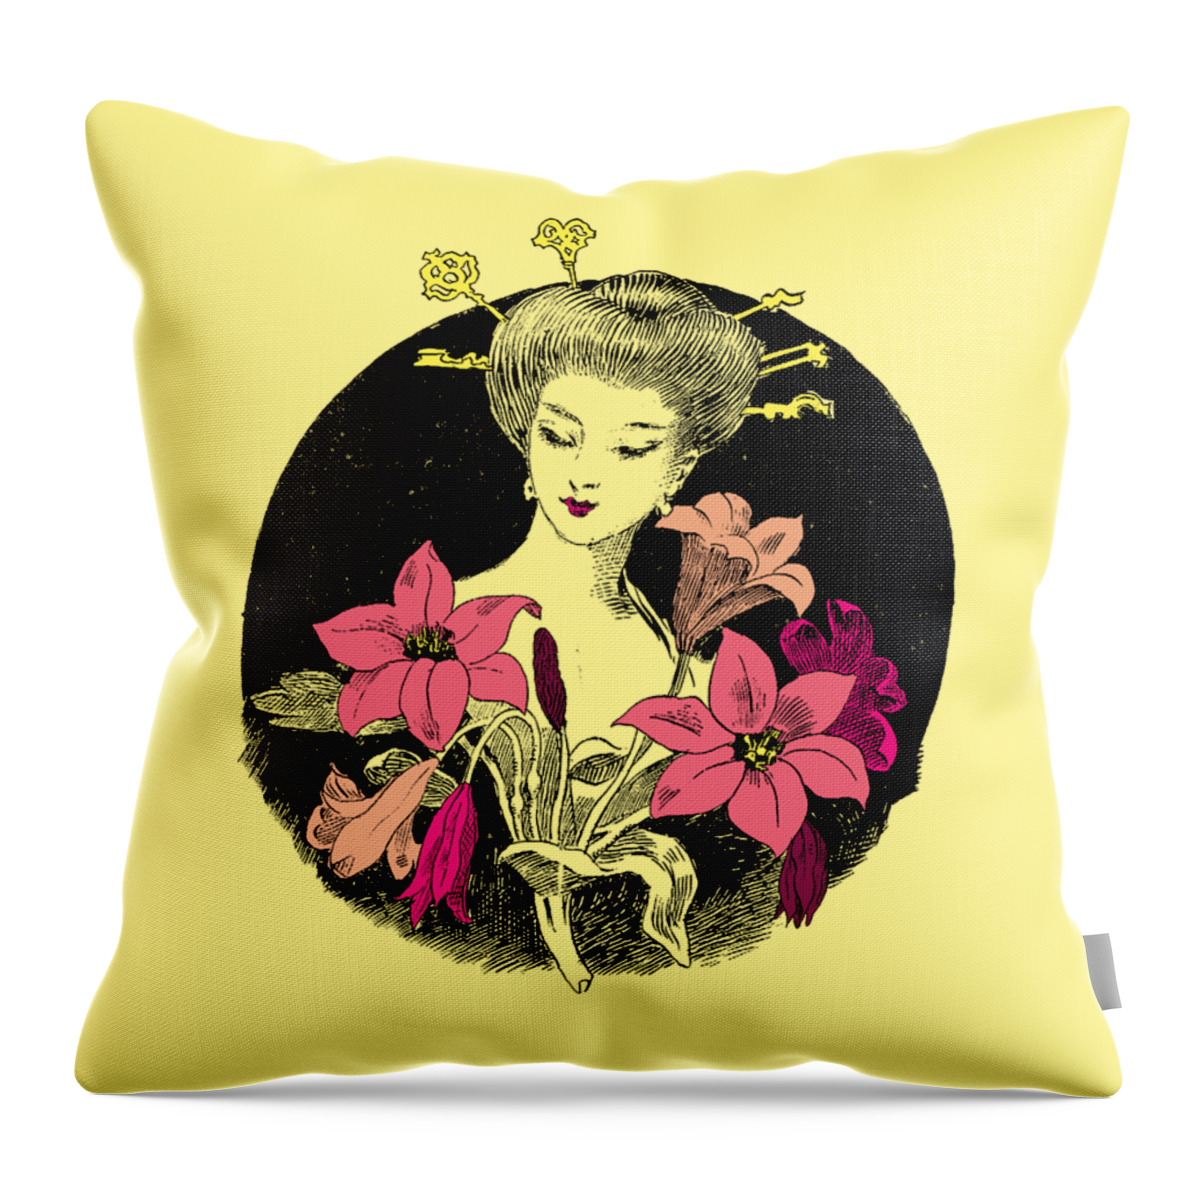 Japan Throw Pillow featuring the digital art Japanese Lady Portrait by Madame Memento